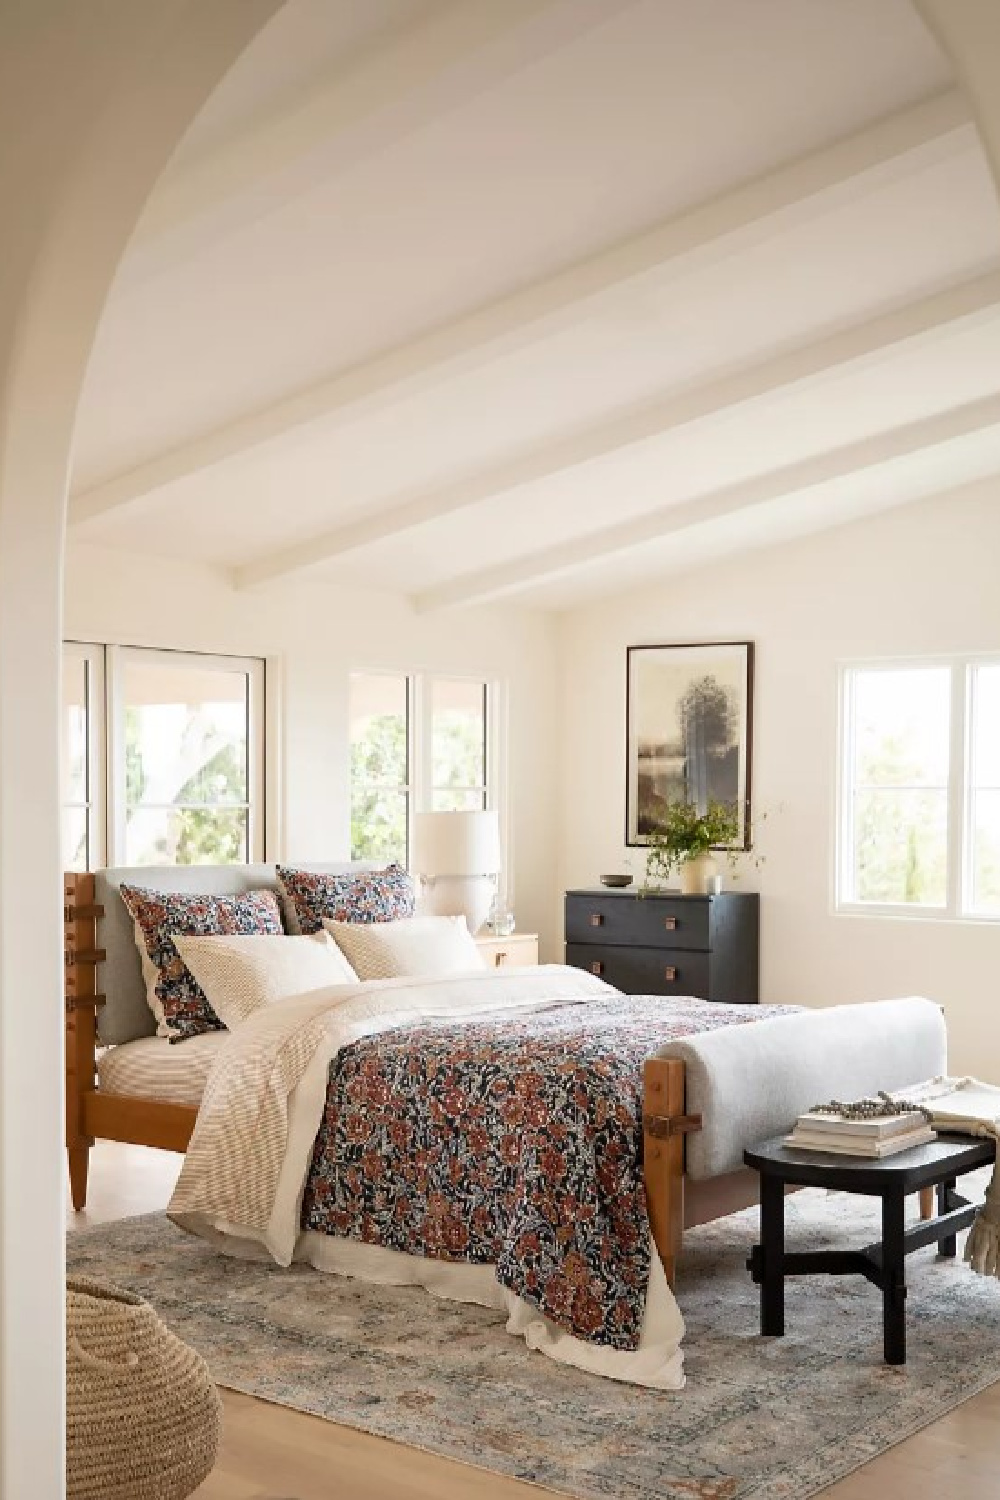 Cozy California cool modern rustic bedroom by Amber Lewis with Revery Rug from Anthropologie. #arearugs #bedroomdecor